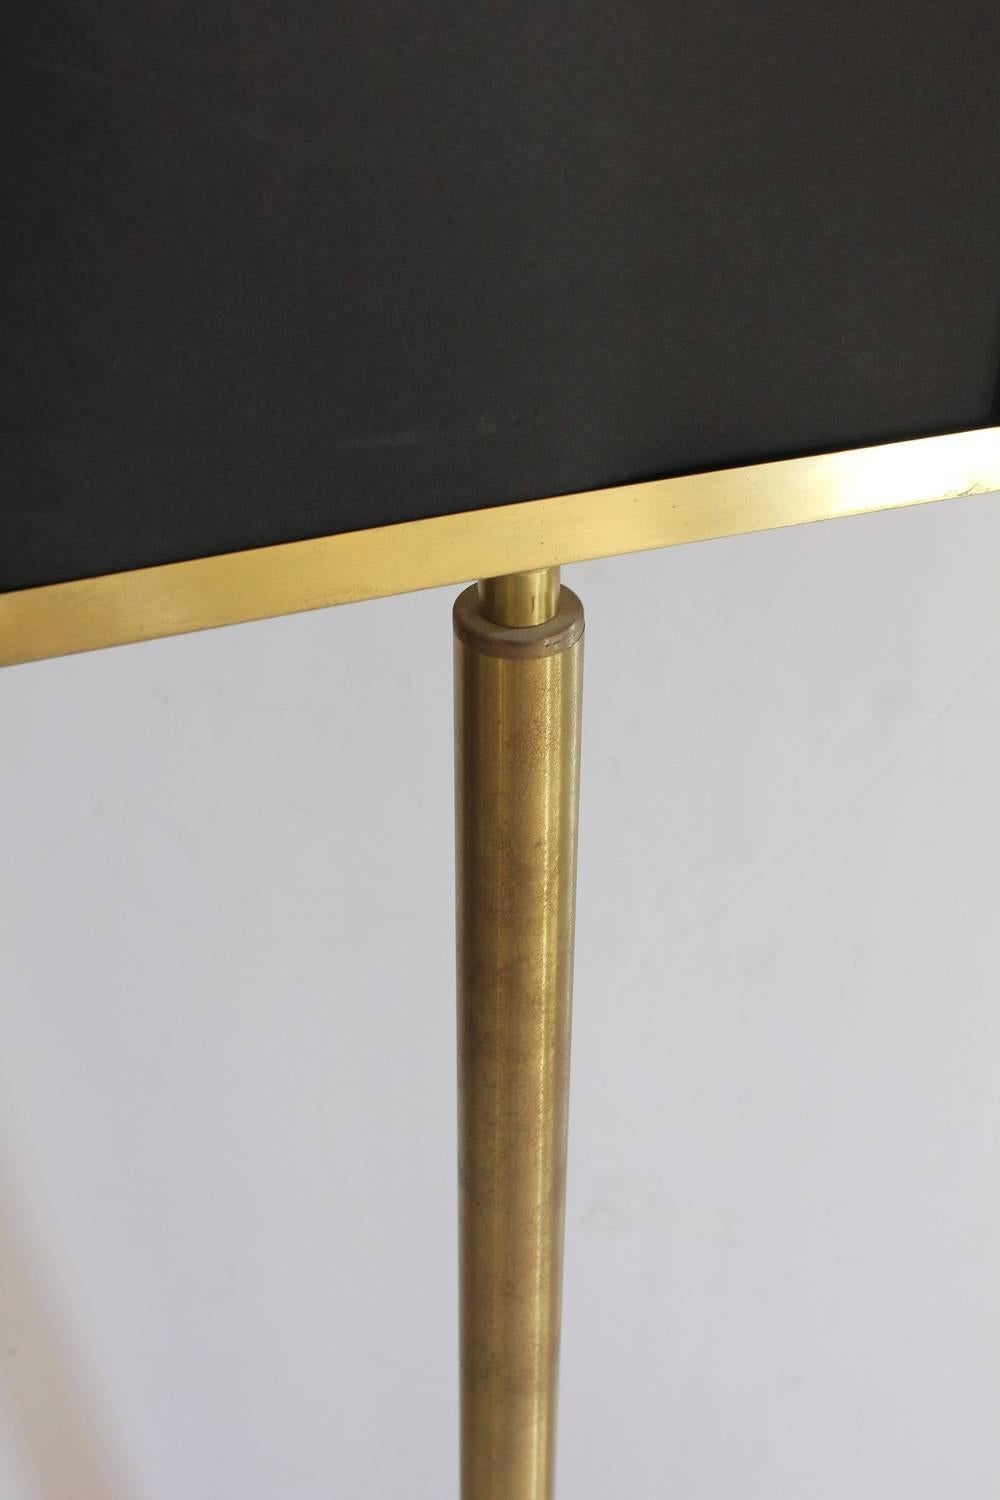 Vintage restaurant double-sided sign floor brass stand. Size of sign 13.5